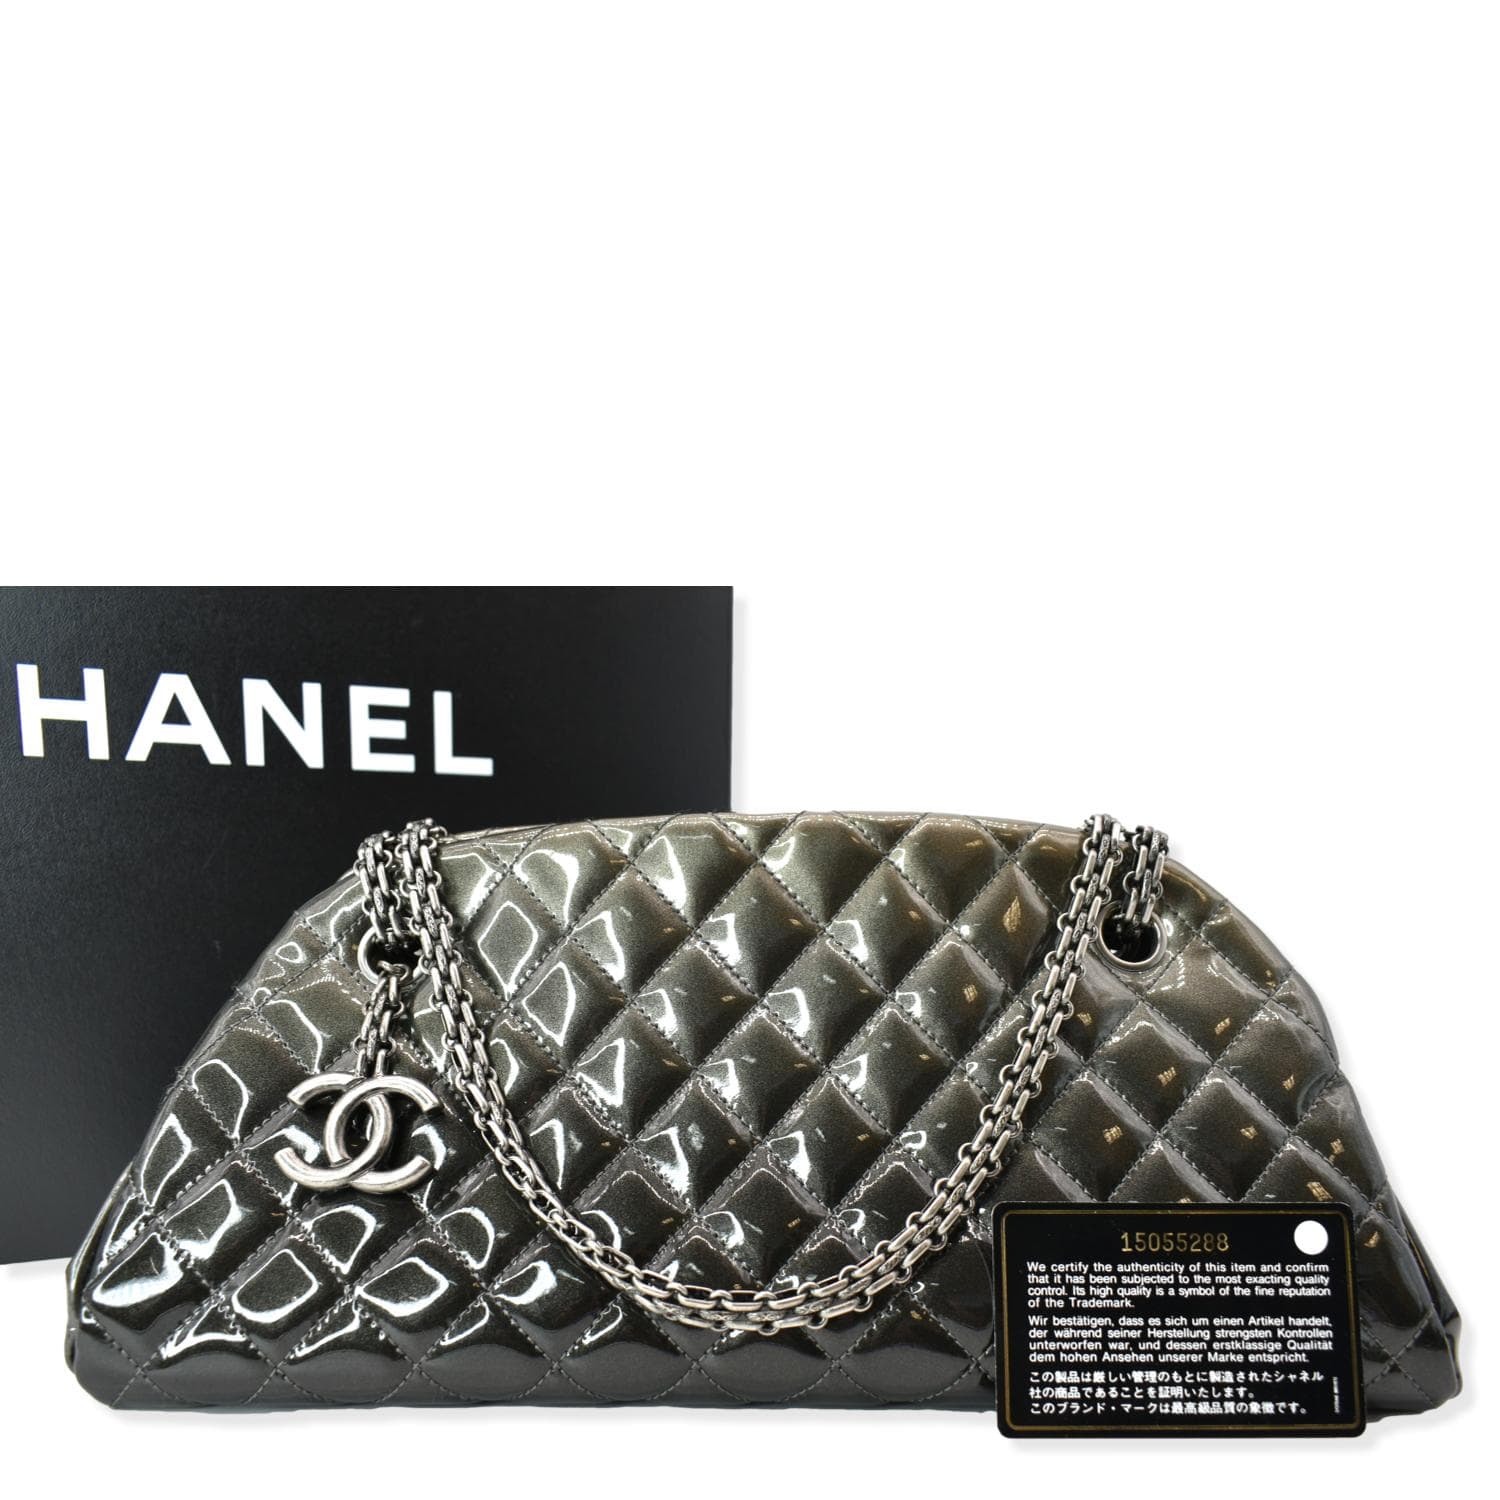 CHANEL Just Mademoiselle Ombre Degrade Patent Quilted Bowling Bag Blac